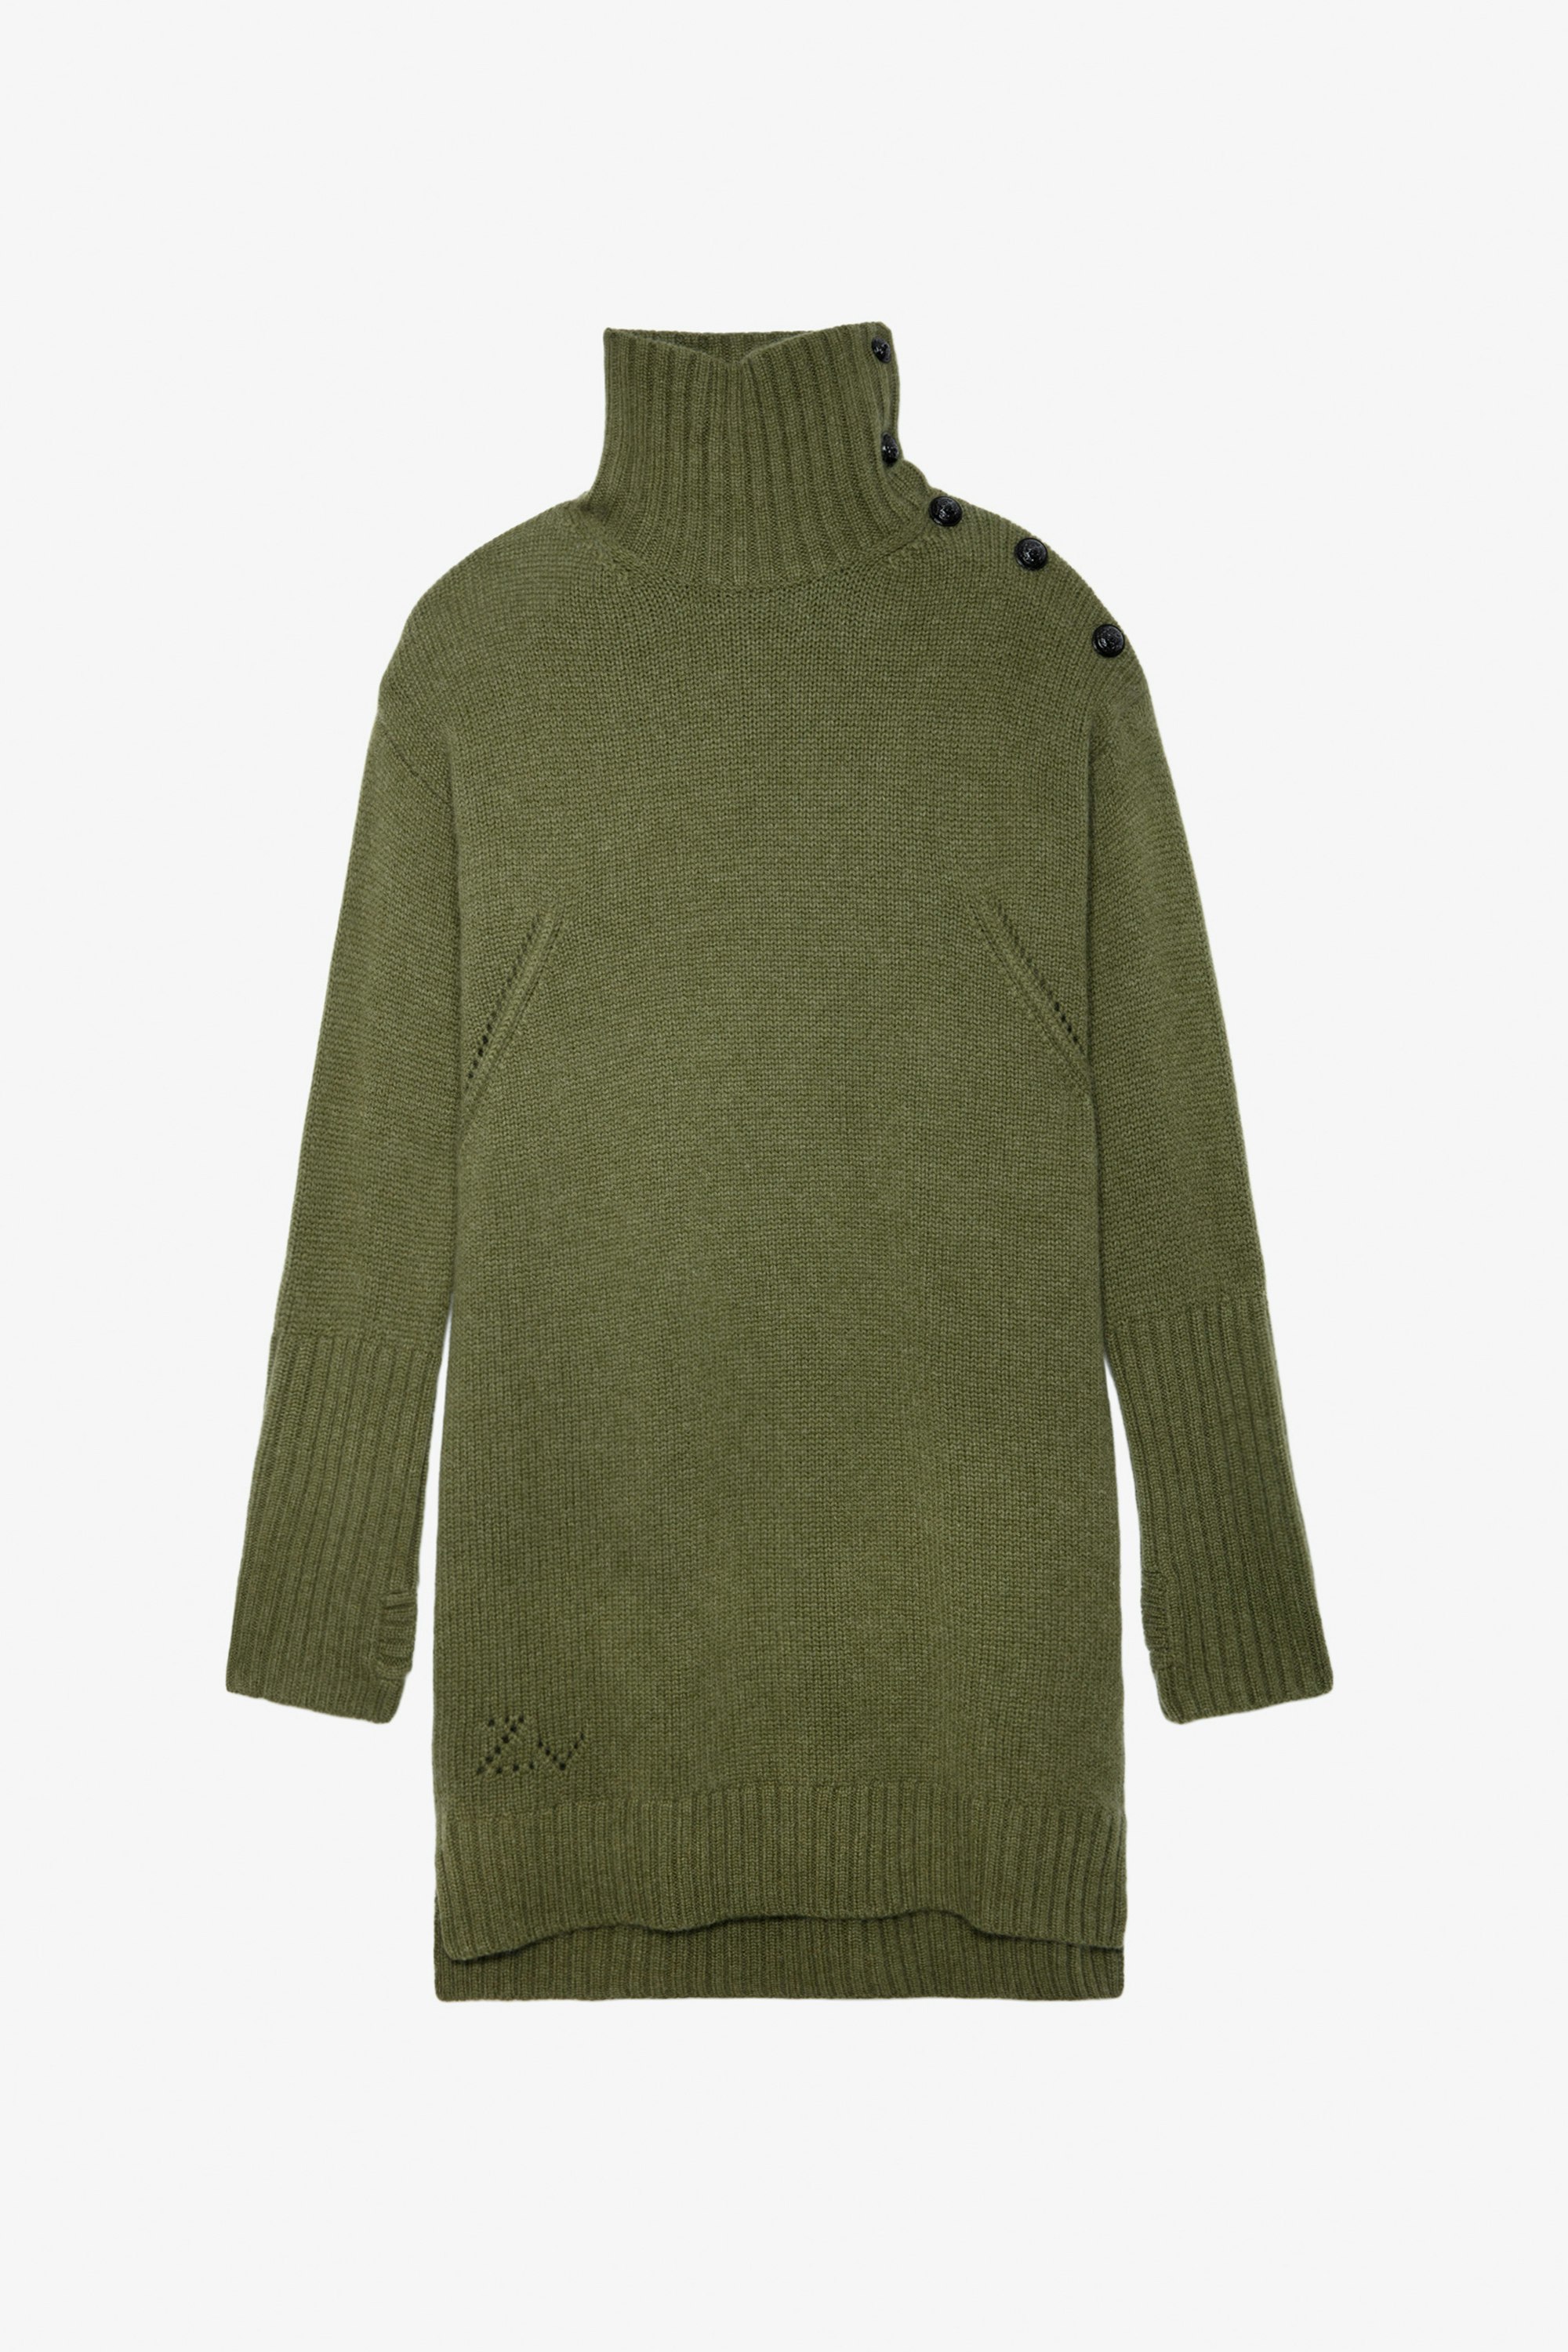 Almira Cashmere Dress - Women’s short khaki cashmere turtleneck dress with buttons on the shoulders and long sleeves.